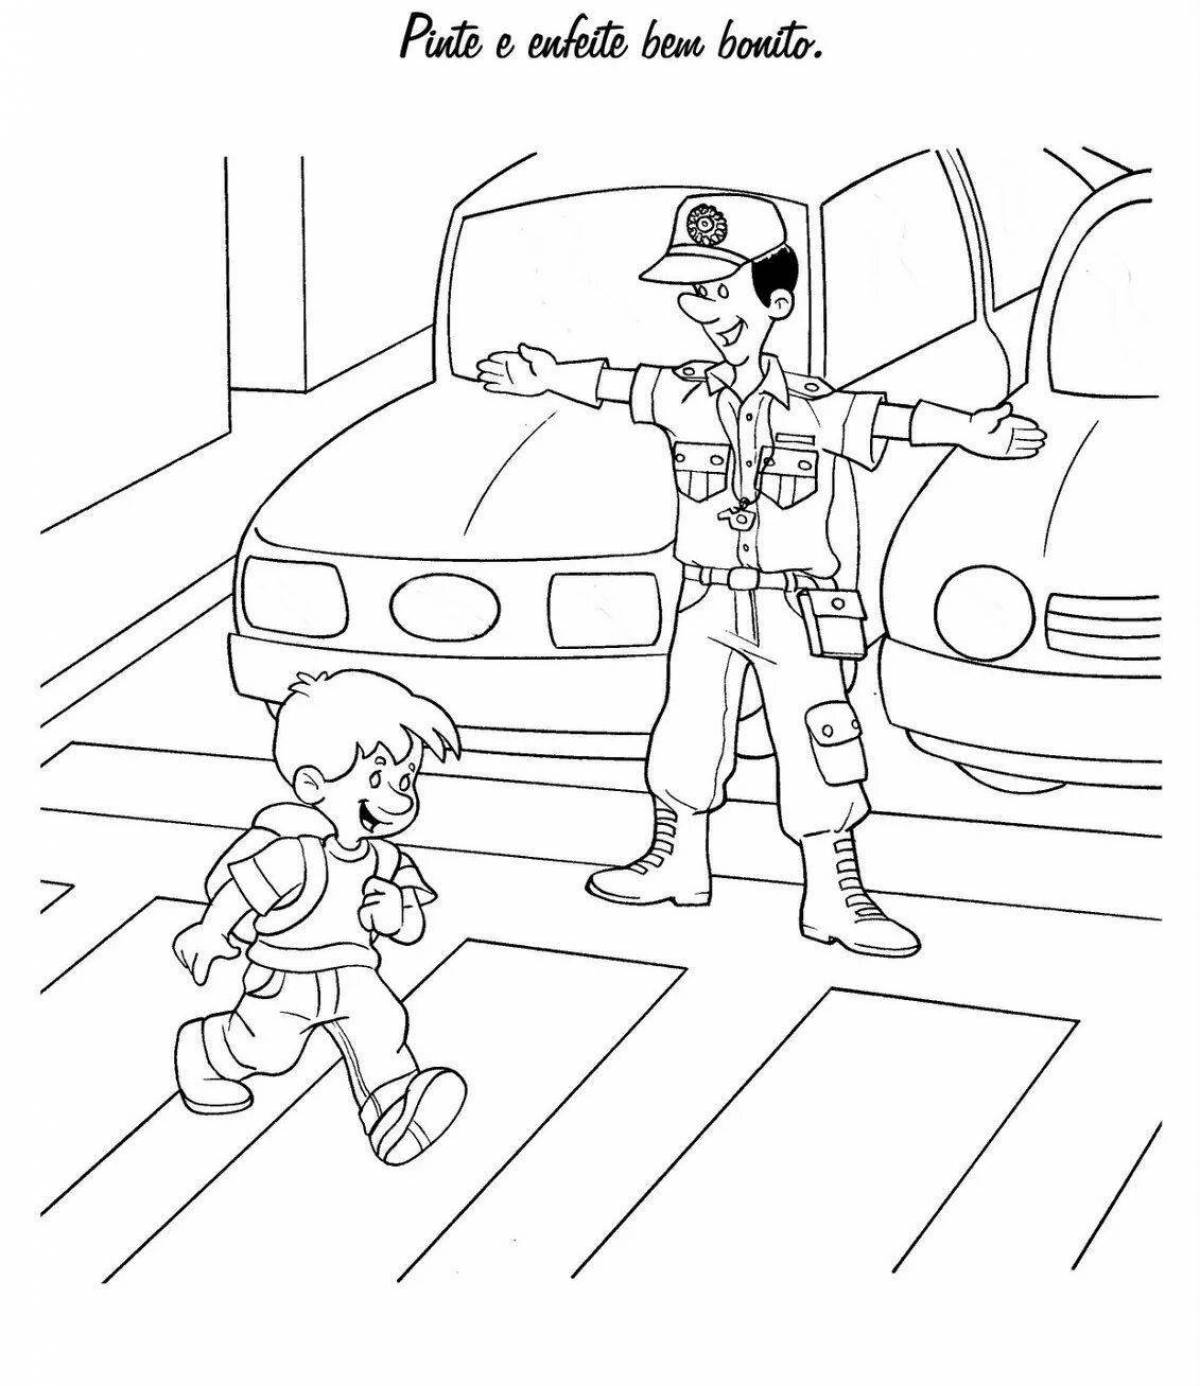 A fun traffic controller coloring page for little ones